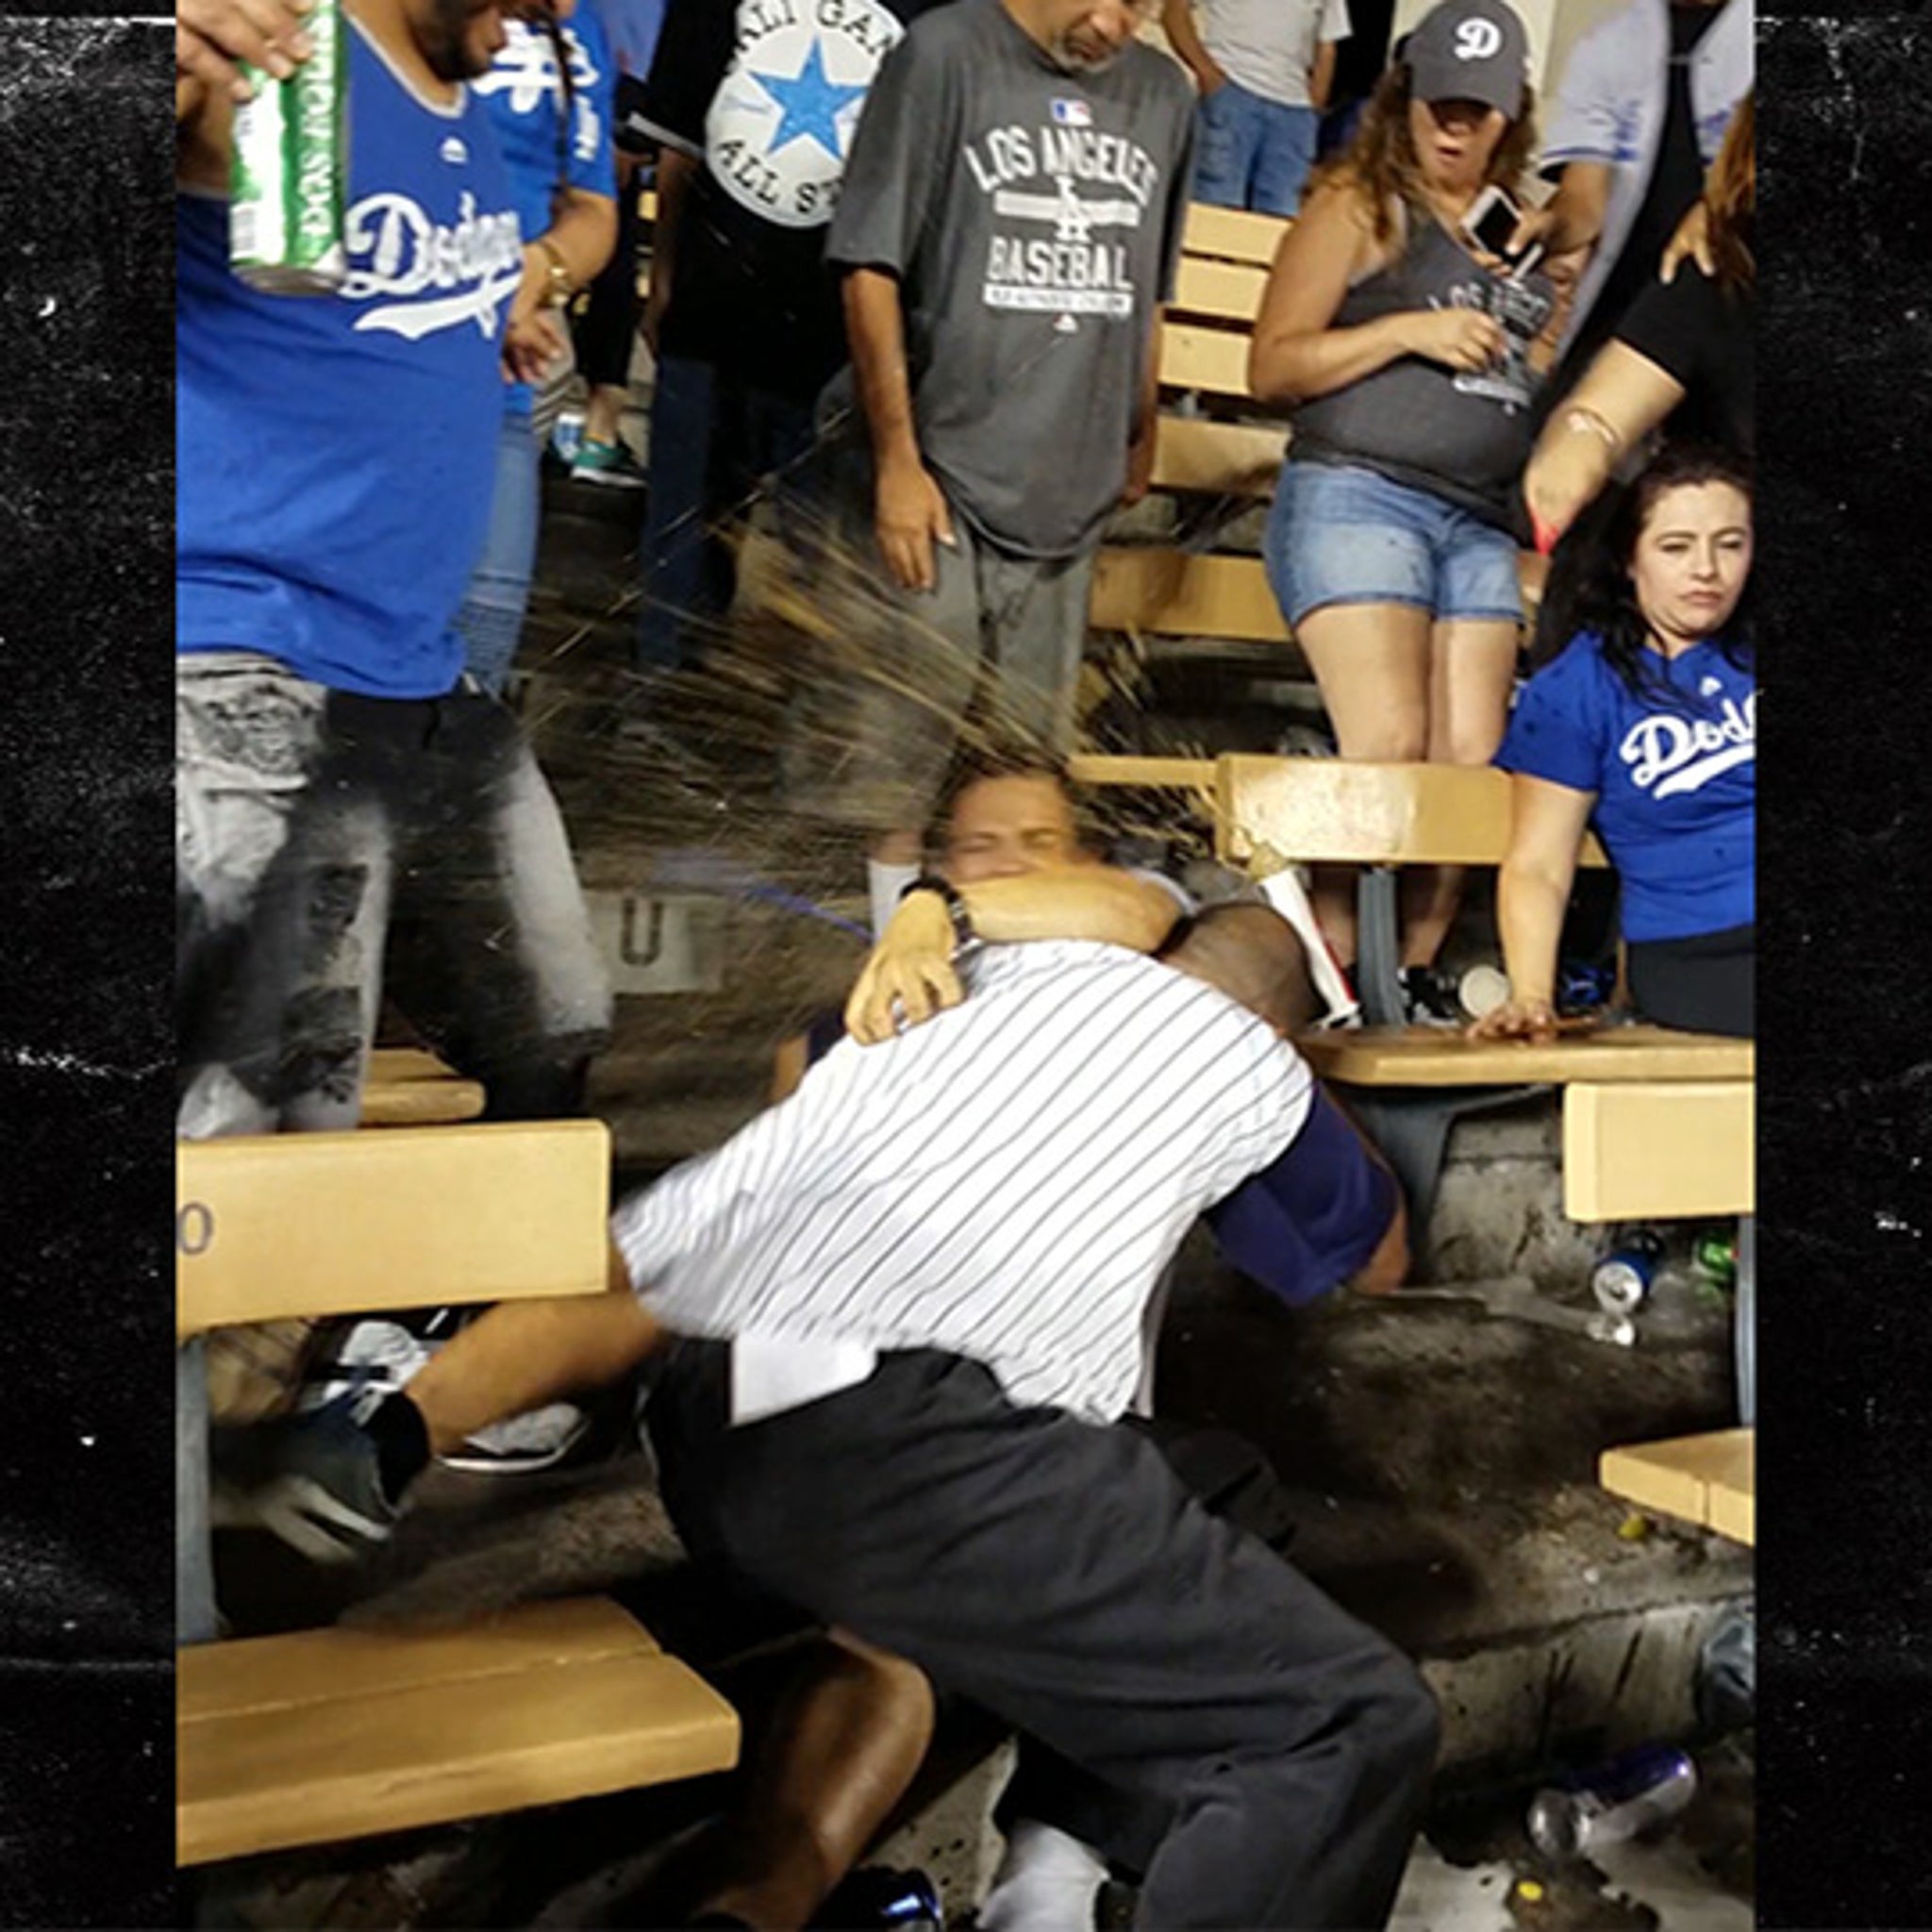 Bloody Brawl Breaks Out At Dodgers vs. Angels Game